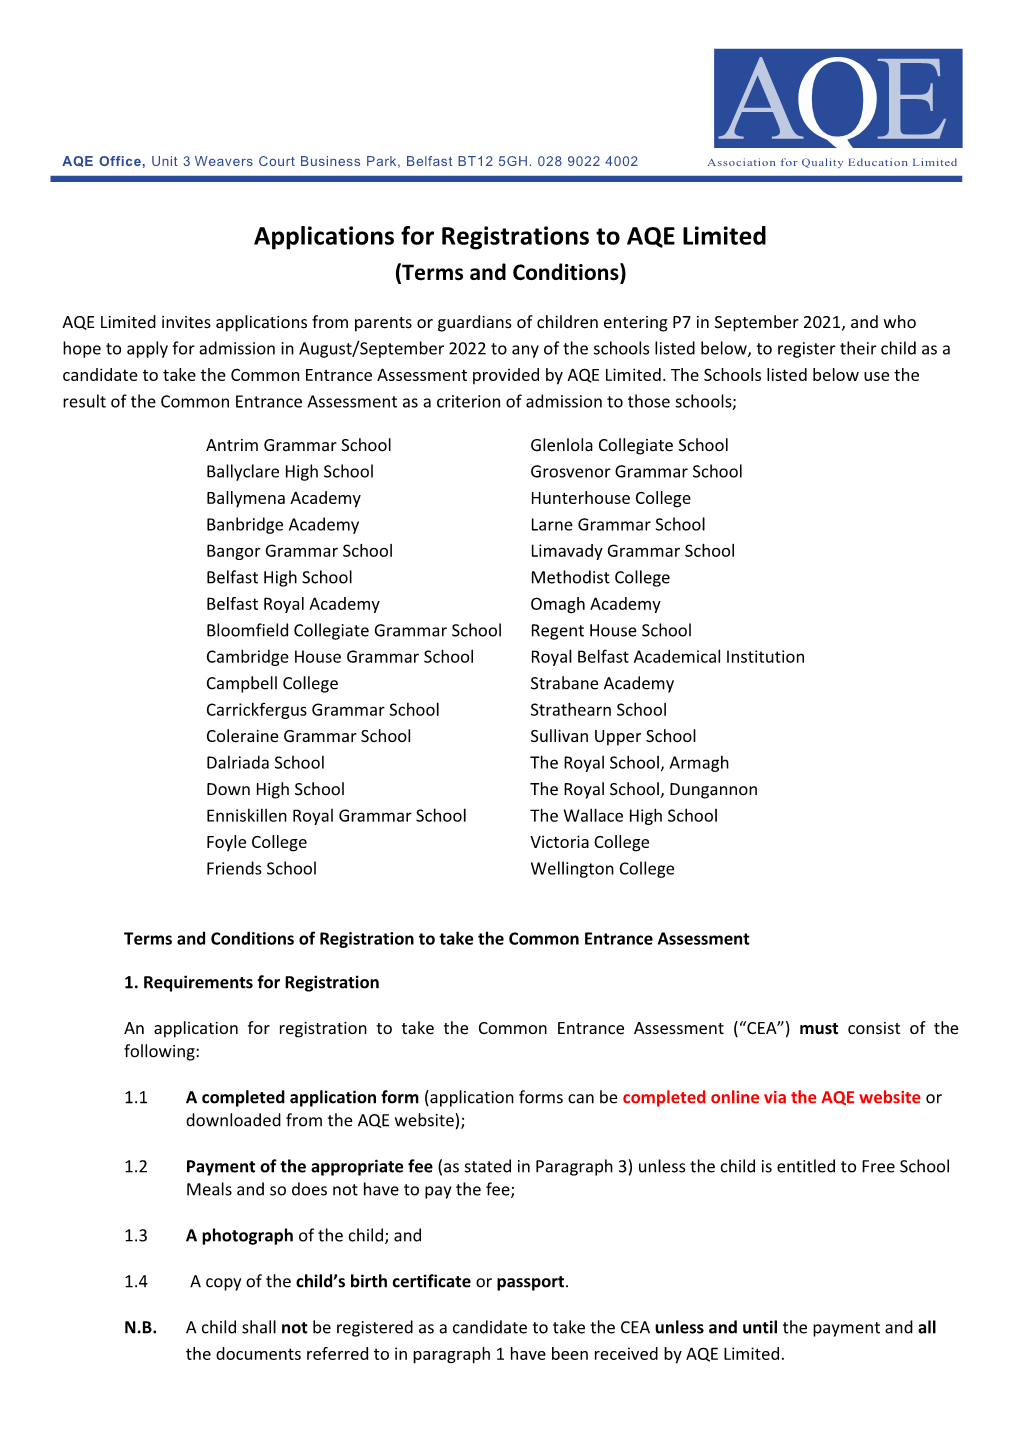 Applications for AQE Terms and Conditions